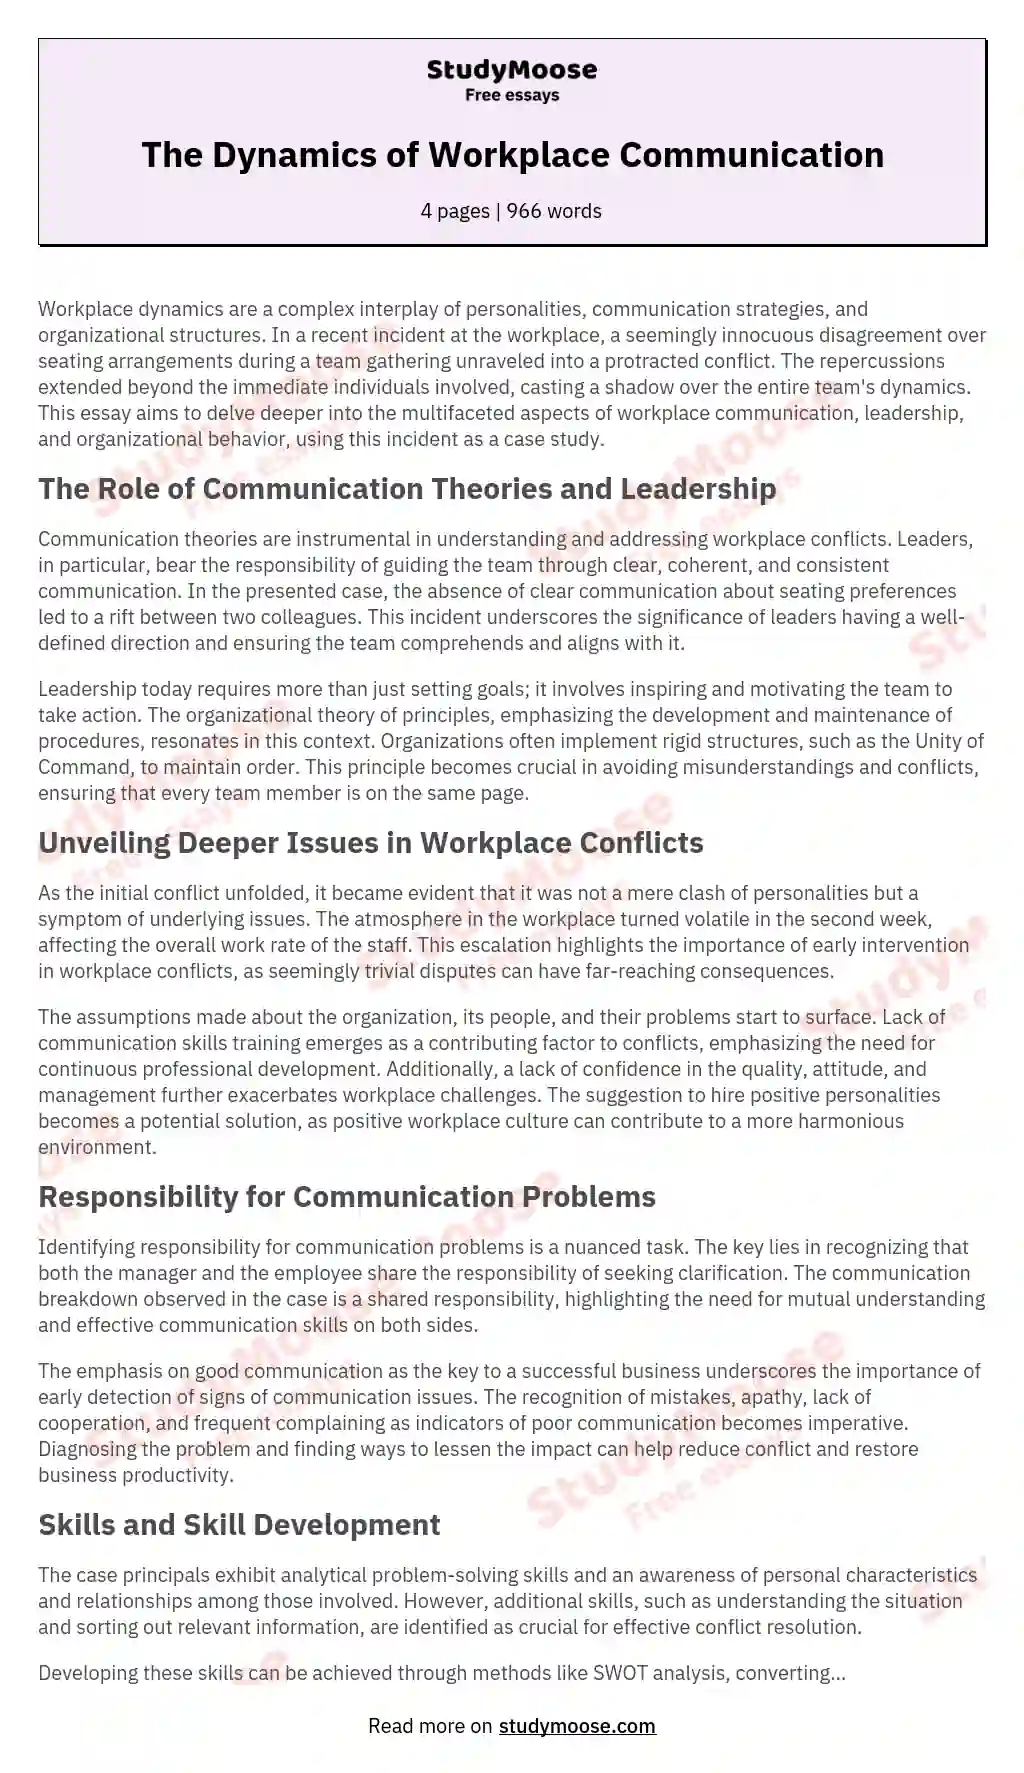 The Dynamics of Workplace Communication essay